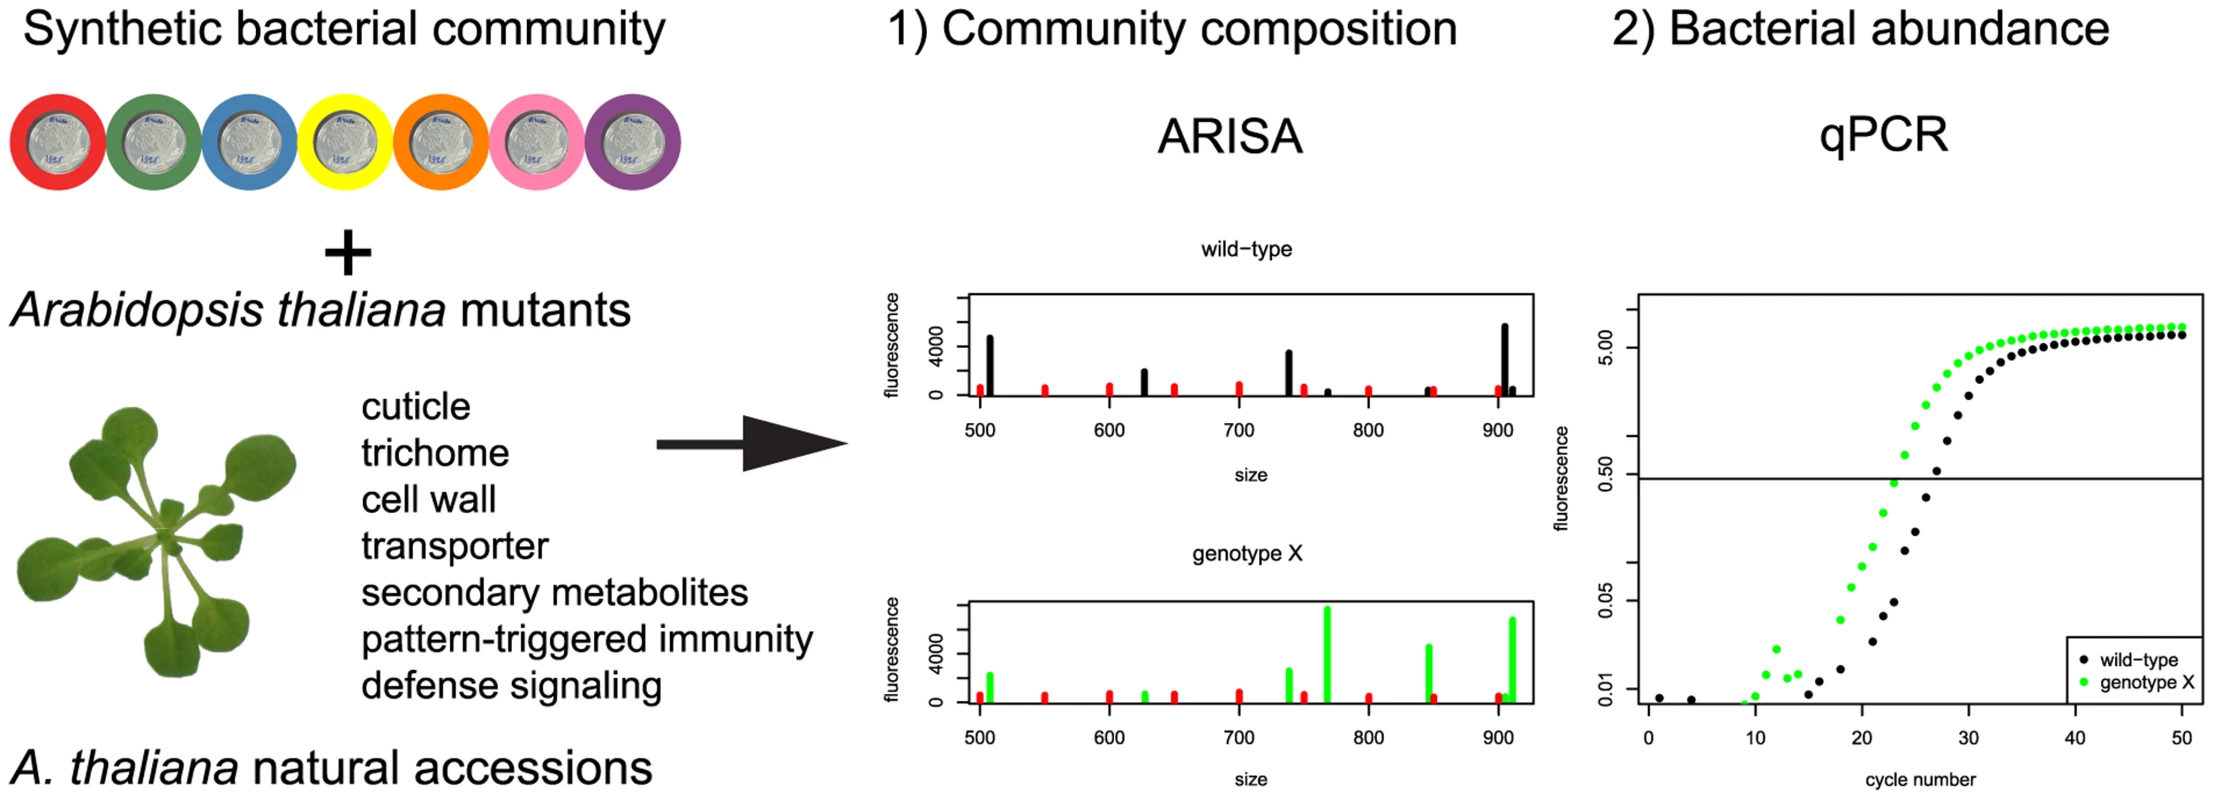 Experimental strategy to identify the plant genes responsible for changes in community composition and/or total bacterial abundance.